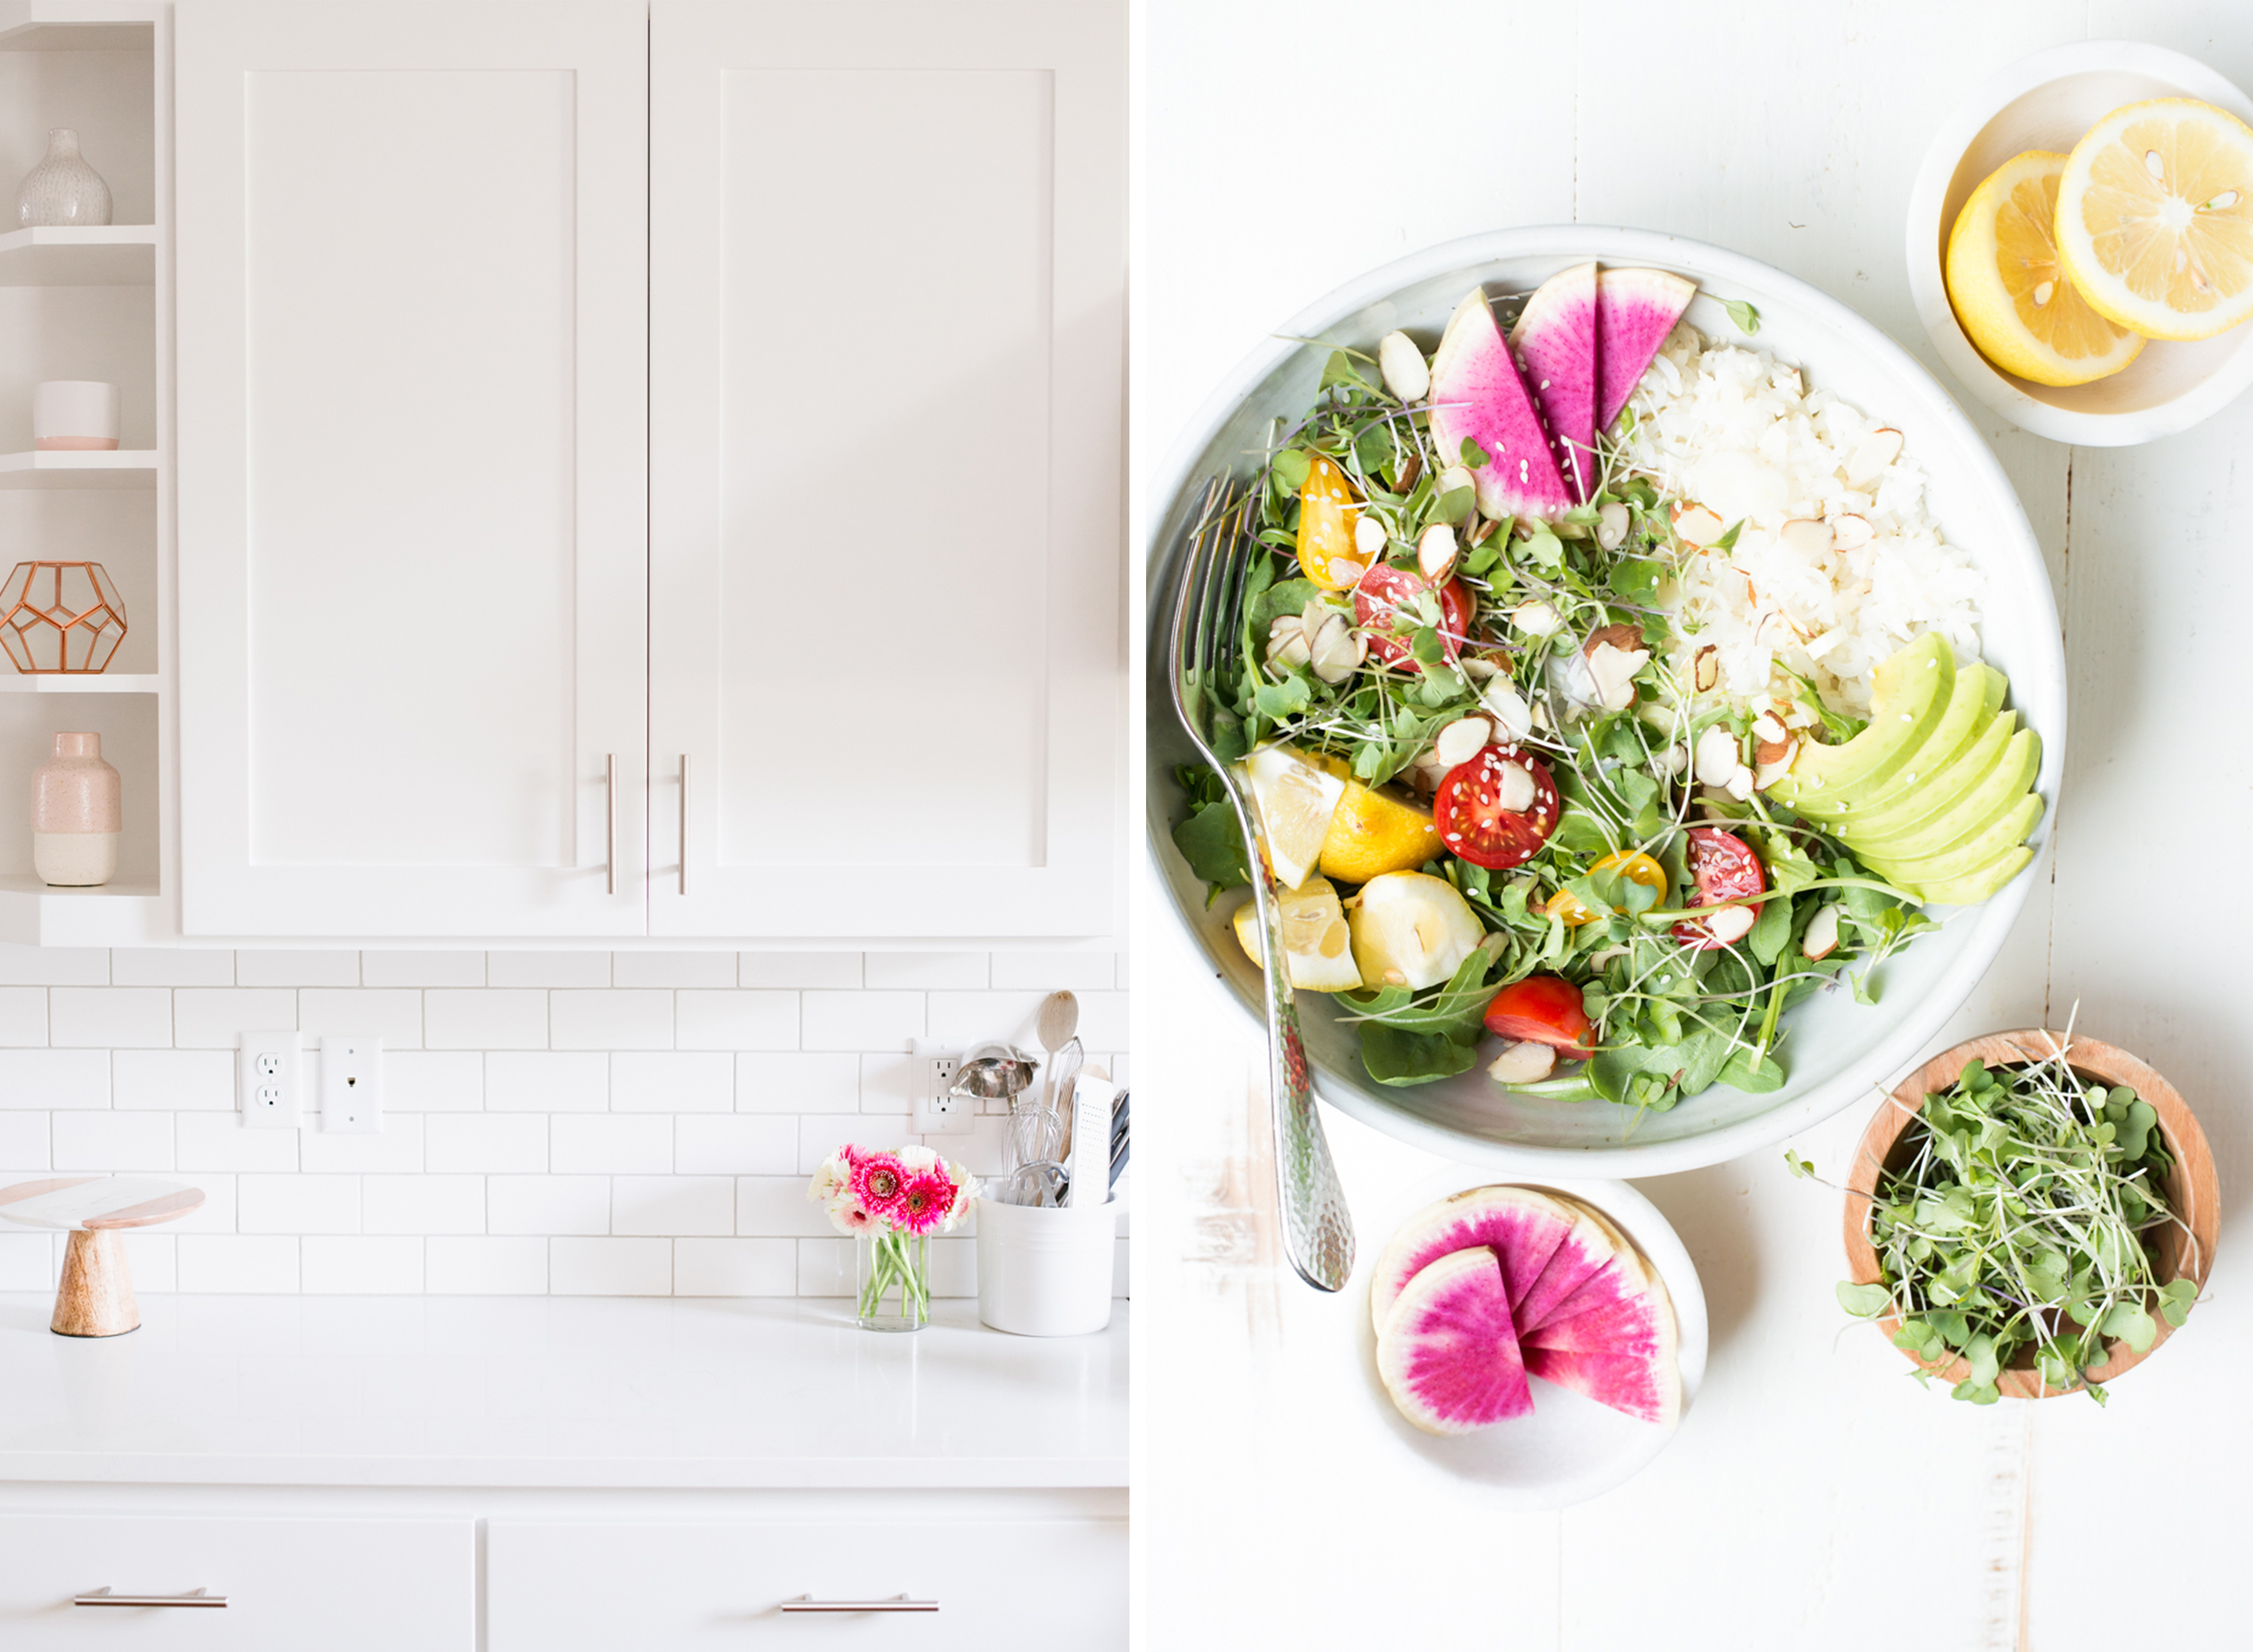 5 Ways to Practice Wellness Working from Home - Solopreneur Advice from Robyn Conley Downs, the founder of Real Food Whole Life.